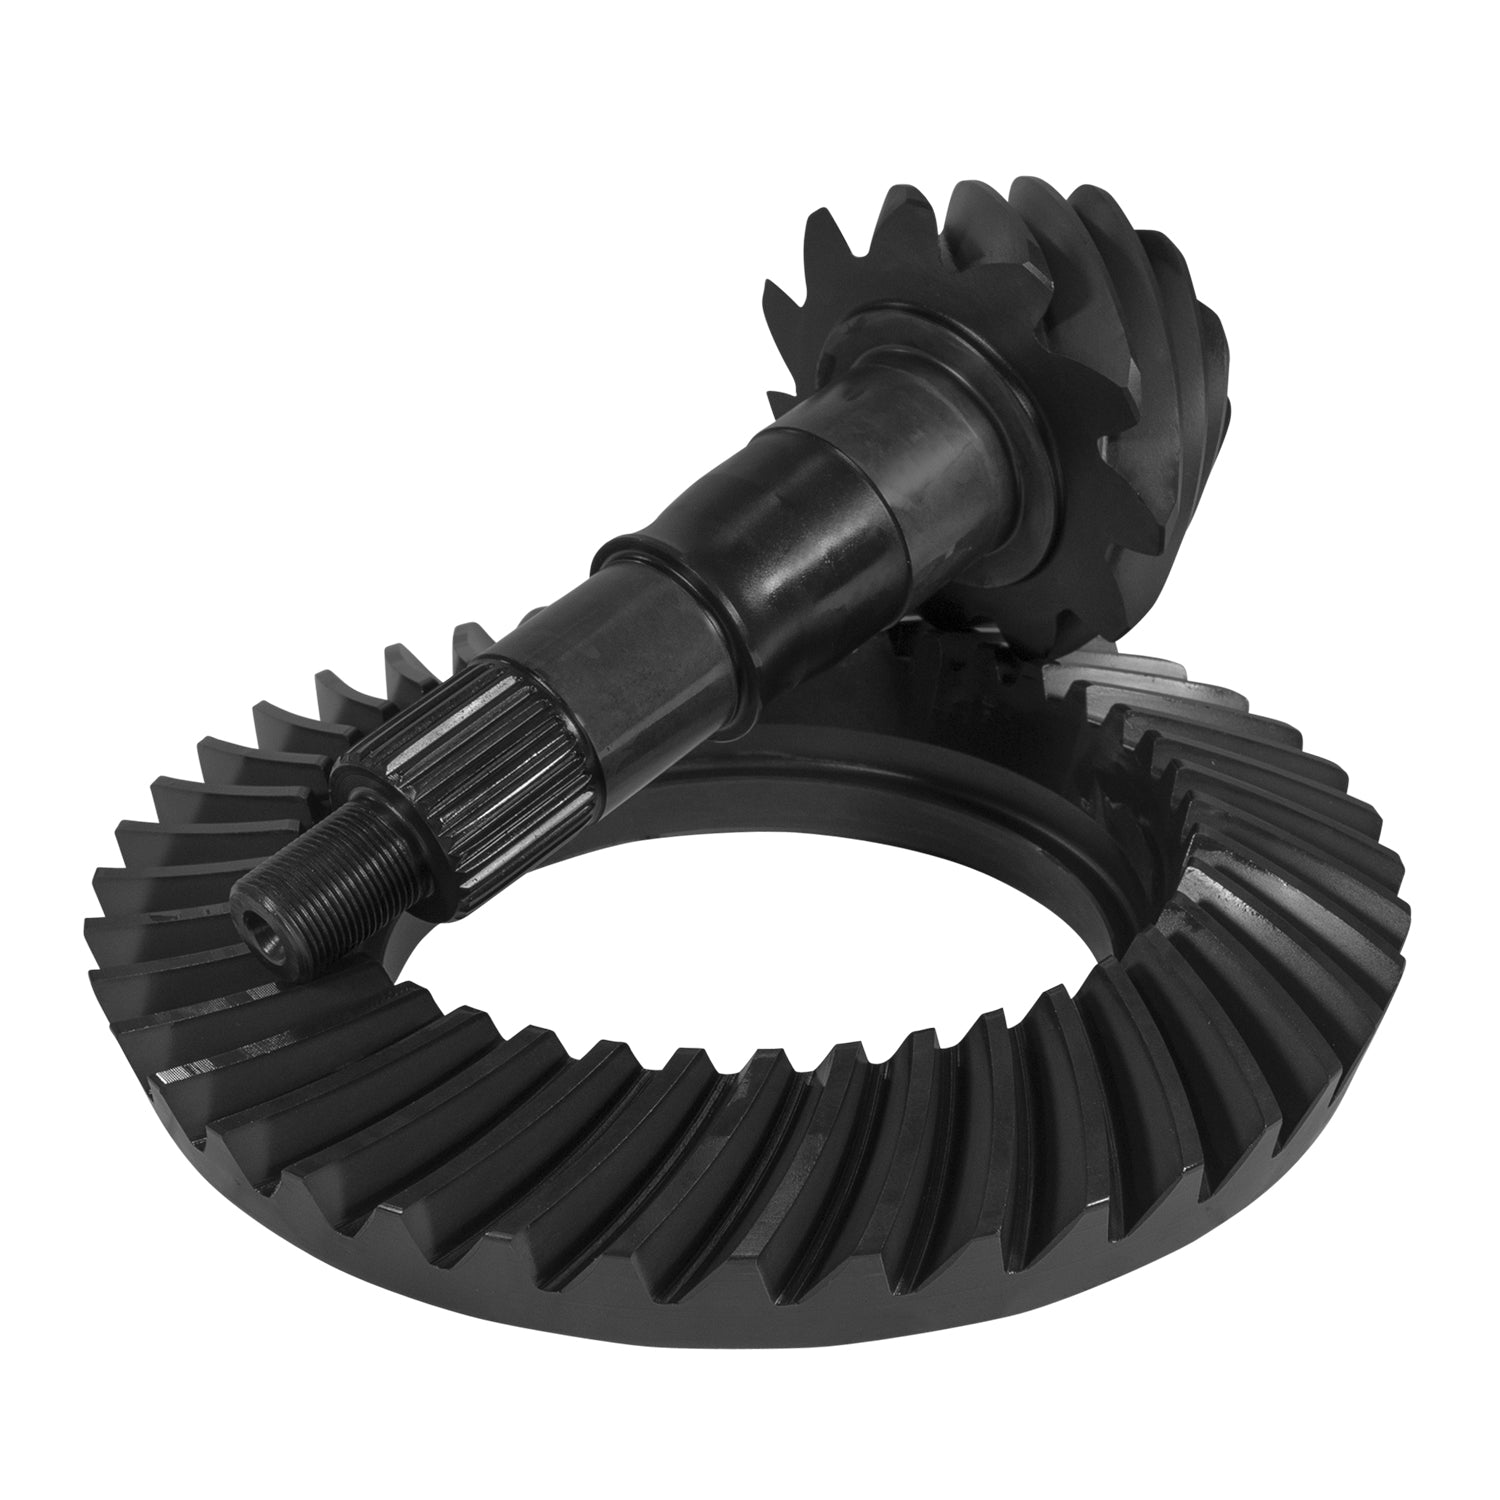 Yukon Gear Ford Lincoln Mercury Differential Ring and Pinion Kit - Rear YGK2379